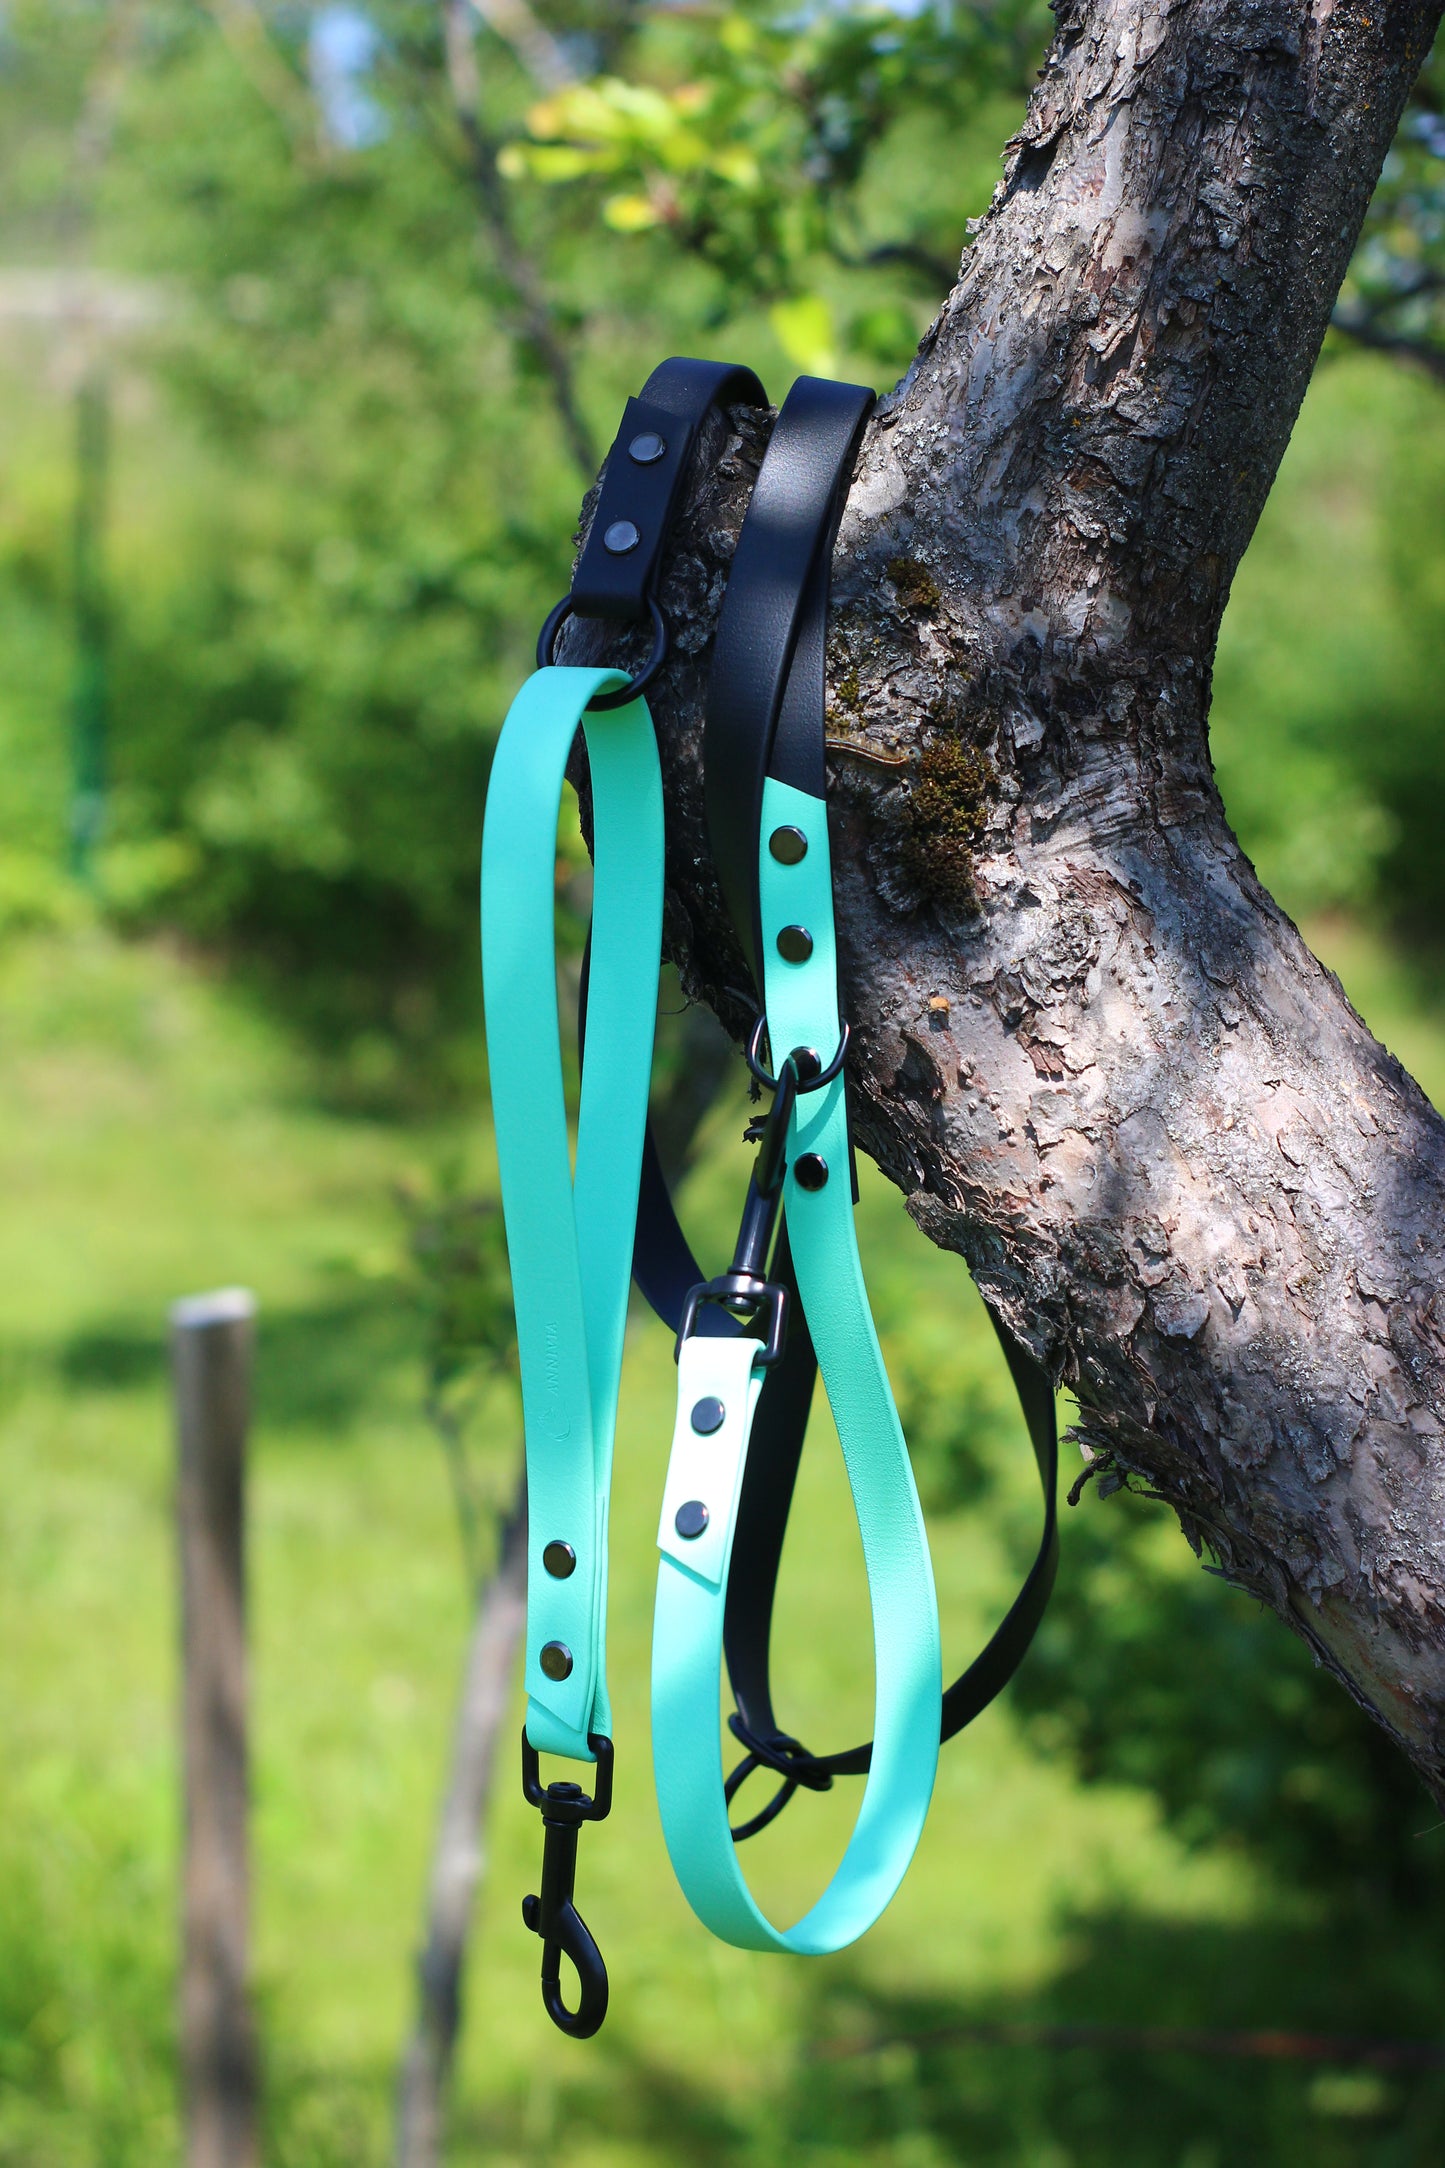 Caribbean Green and Black Biothane Multifunctional Dog Leash with Black Carabiners hanging from a tree branch in a serene park setting.